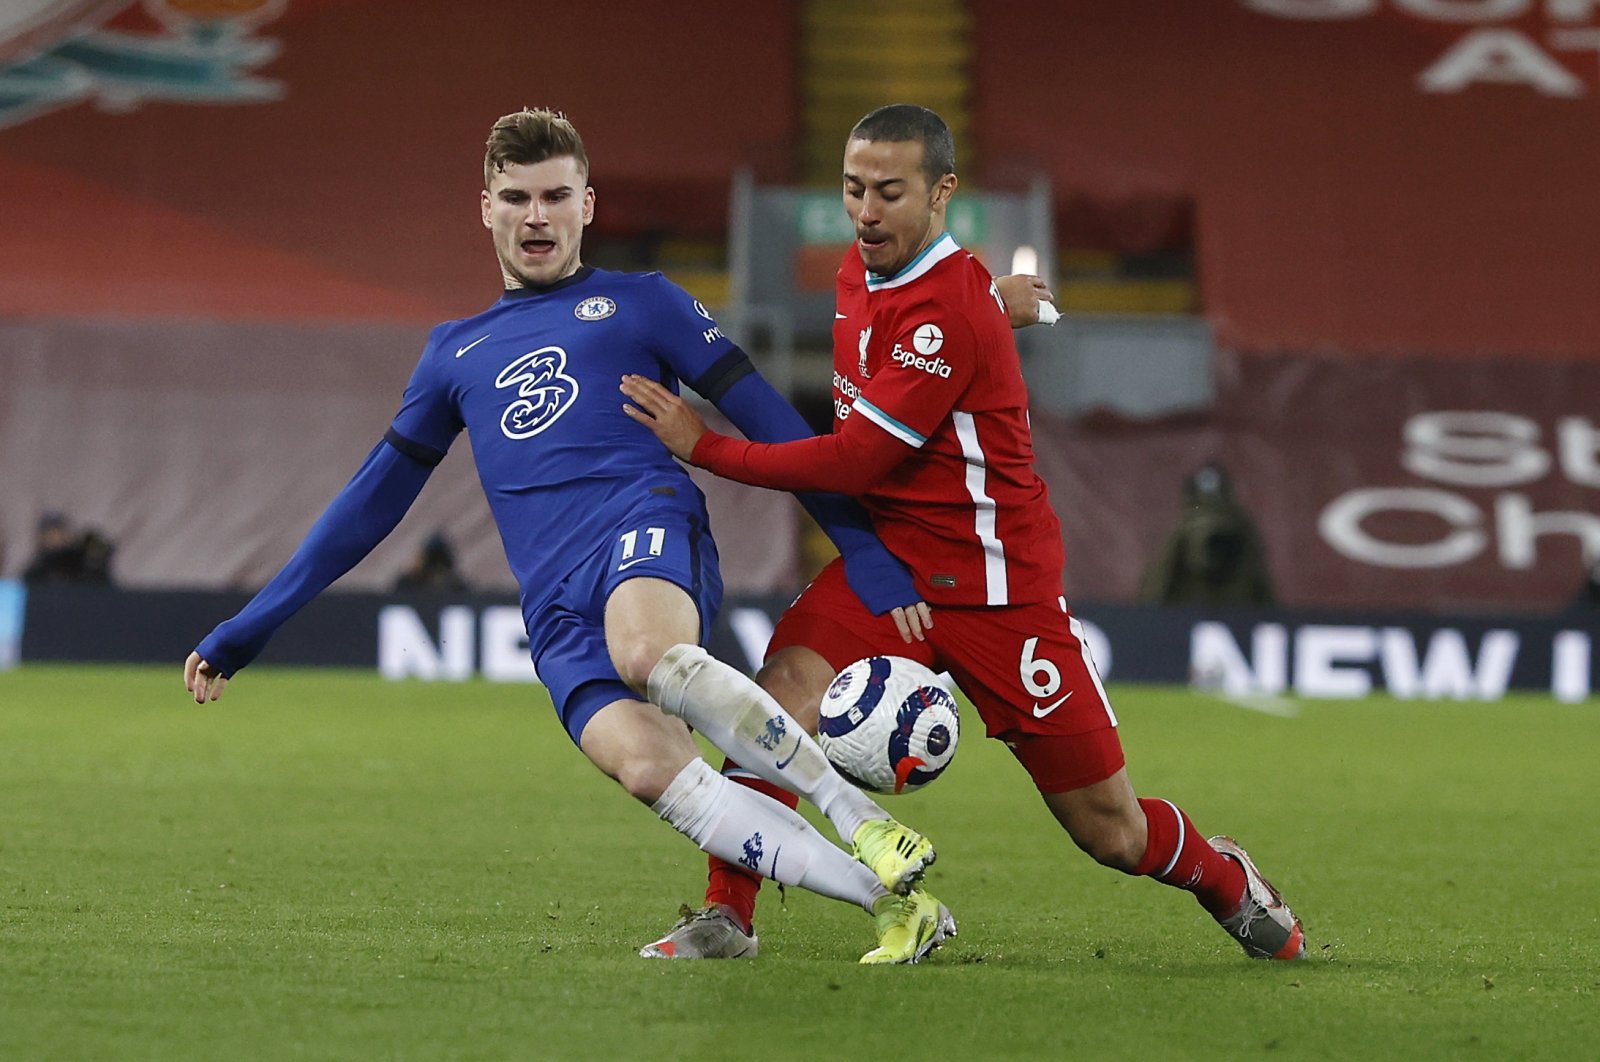 Chelsea's Timo Werner (L) vies for the ball with Liverpool's Thiago during a Premier League match at Anfield stadium in Liverpool, England, March 4, 2021. (AP Photo)